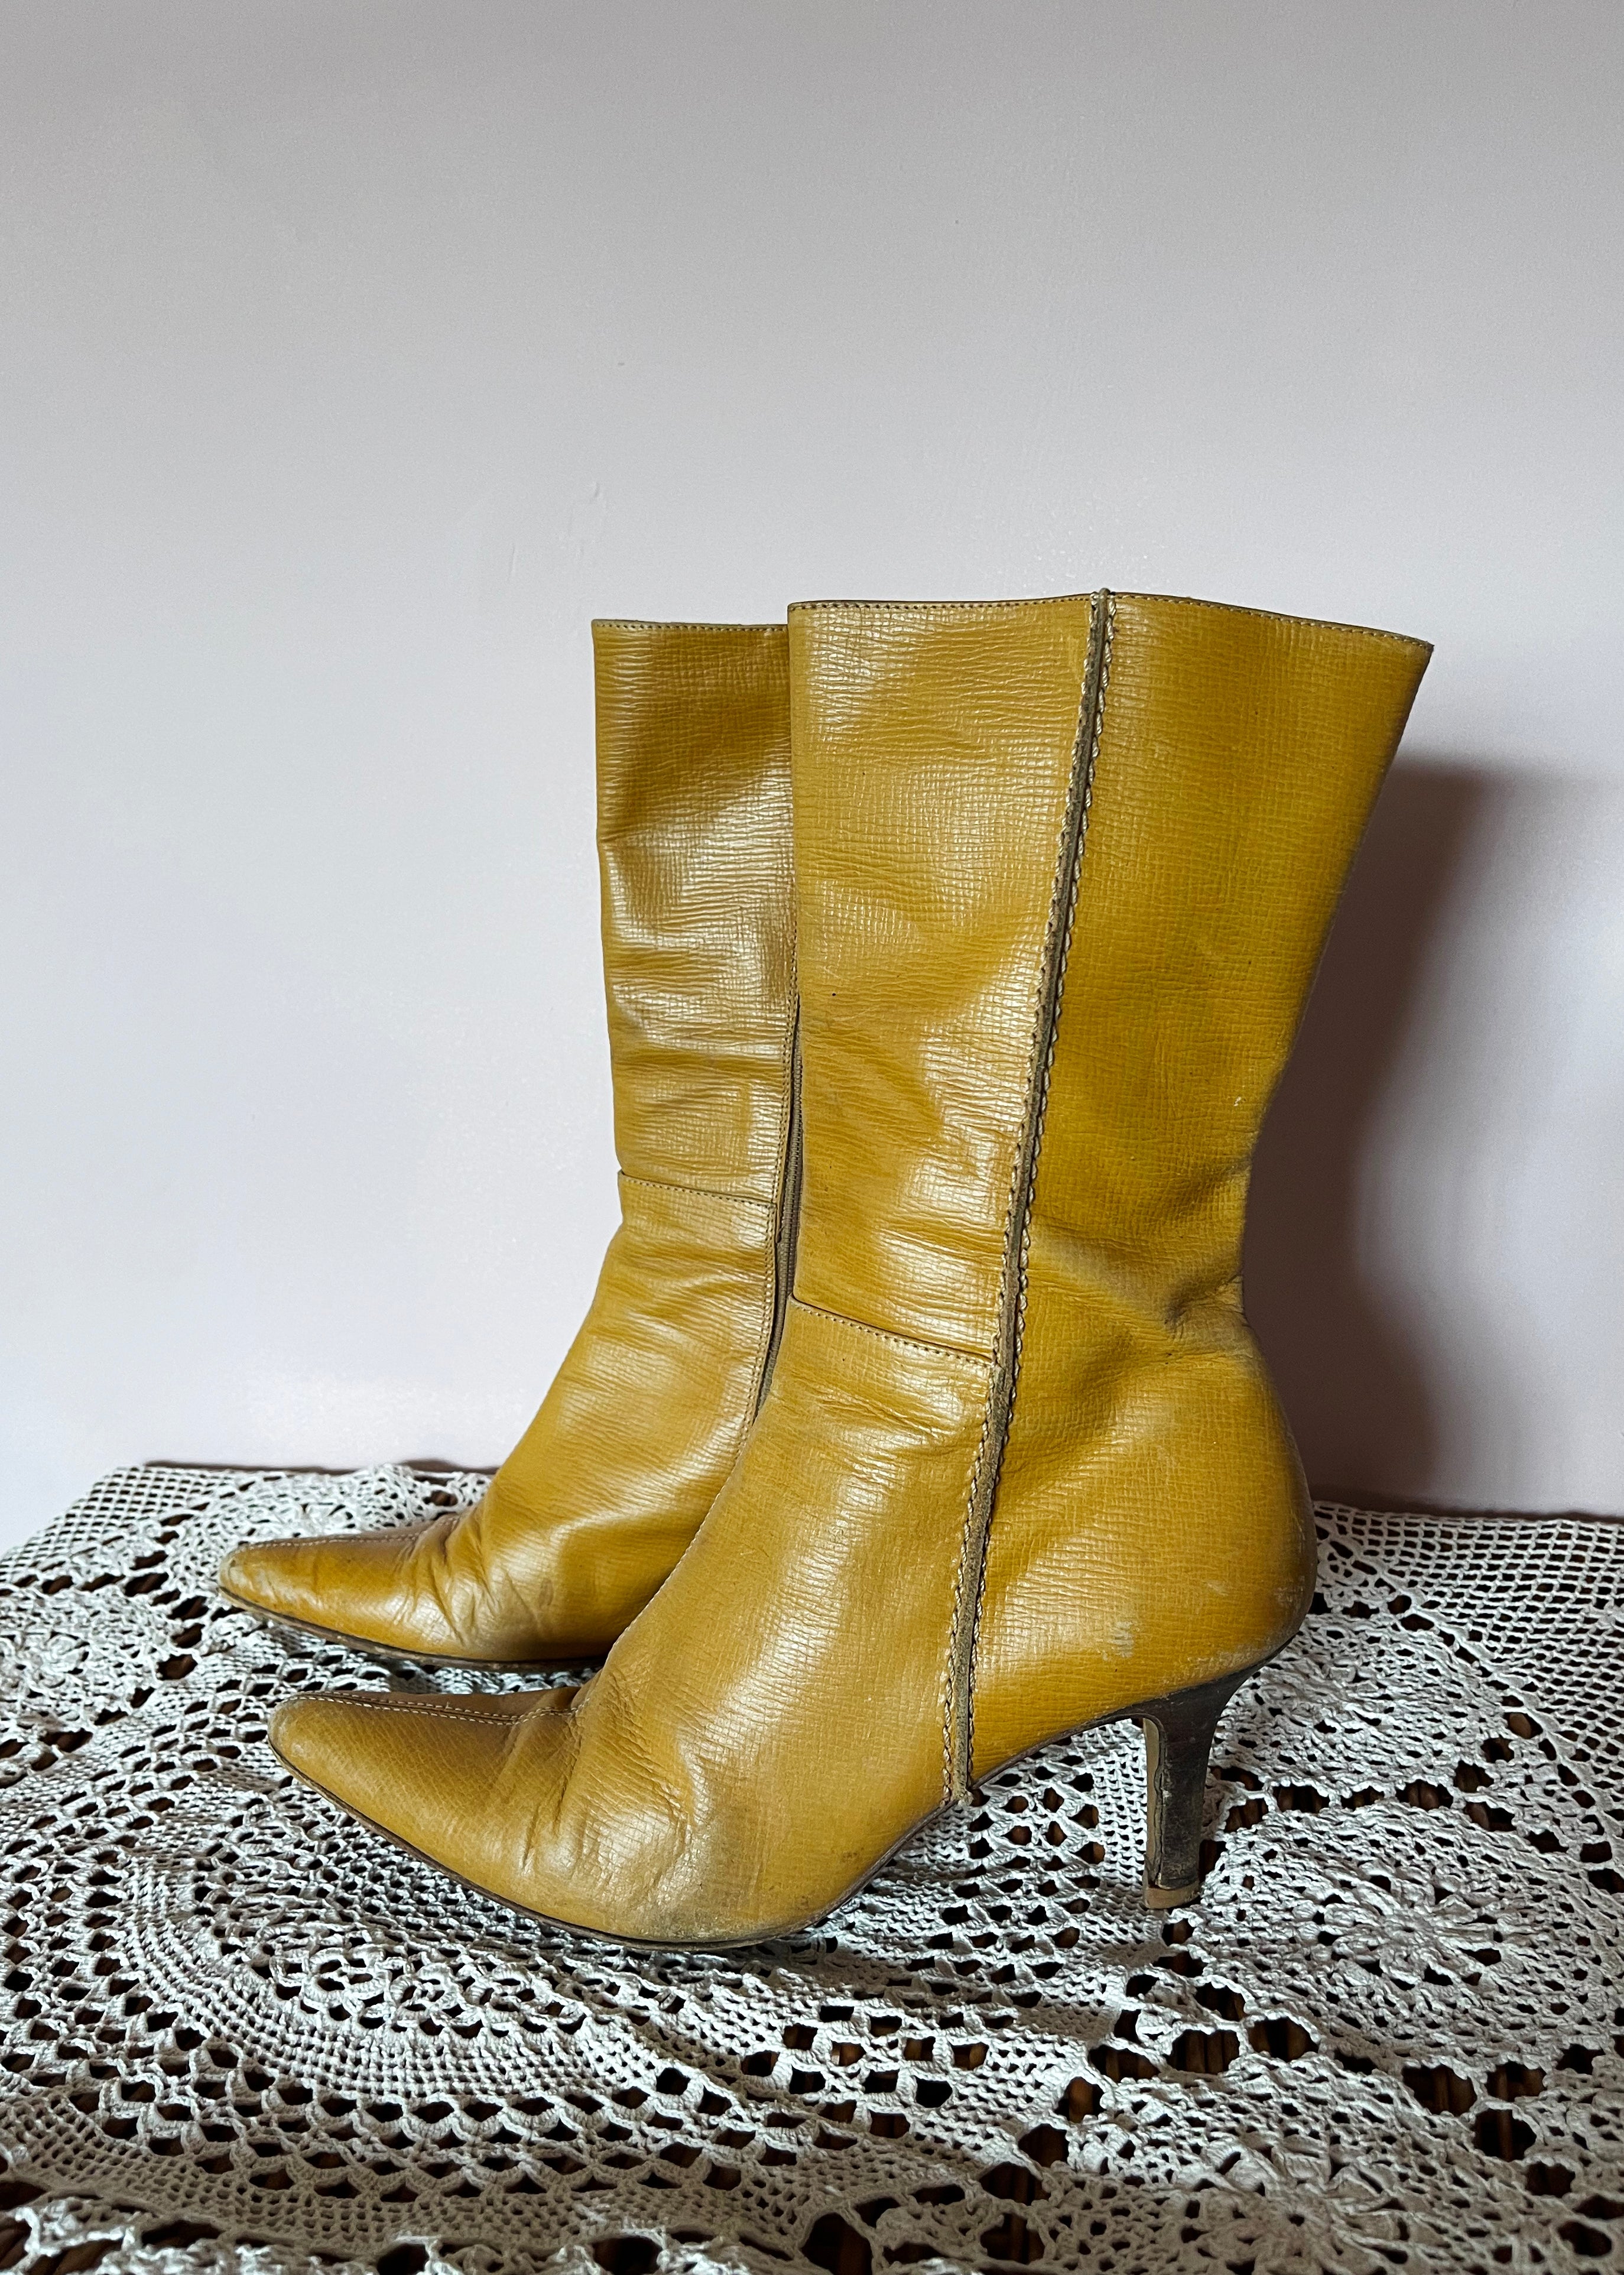 DKNY Tan Leather Boots